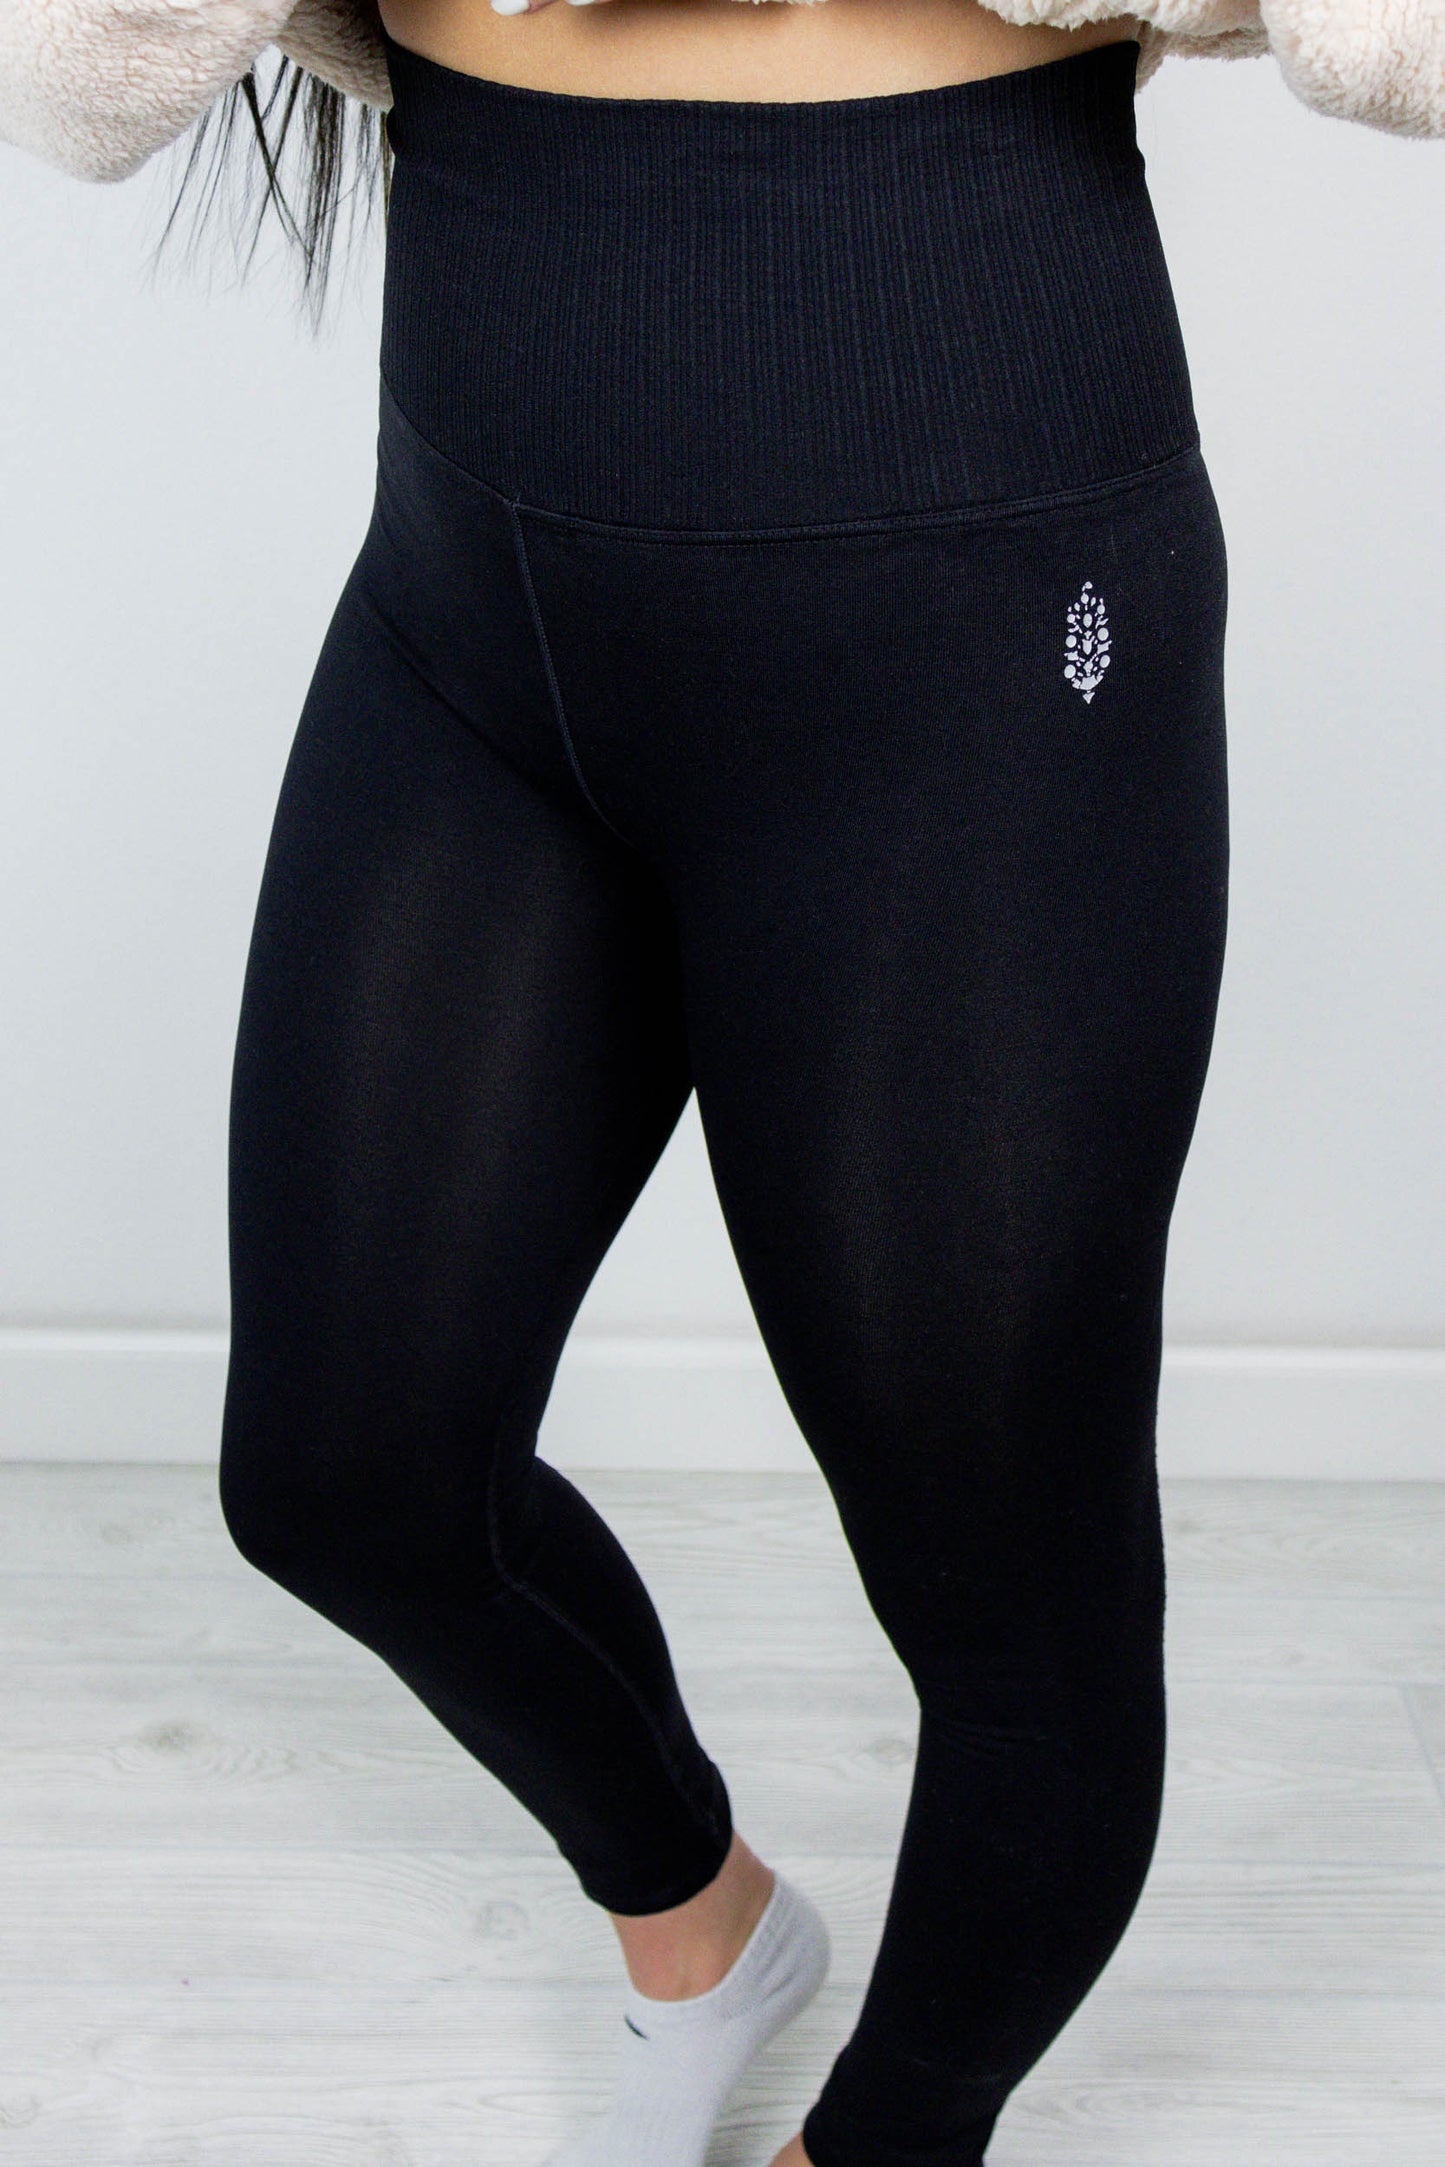 Shop Comfortable Leggings in All Styles and Sizes – The Vault Clothing Co.